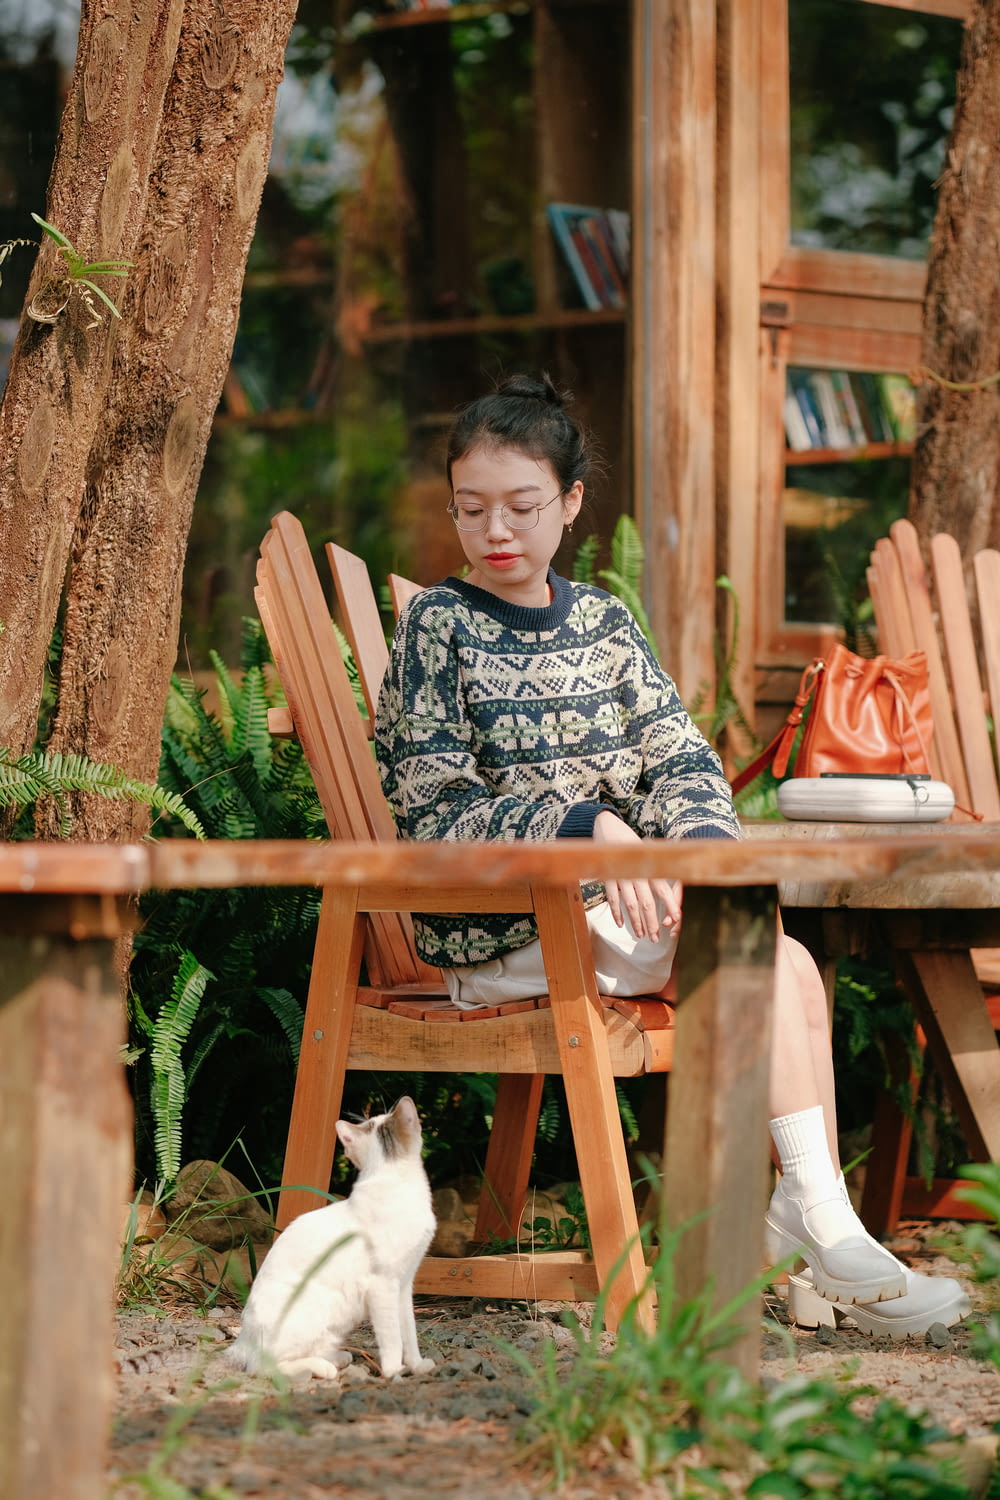 a woman sitting in a chair next to a cat